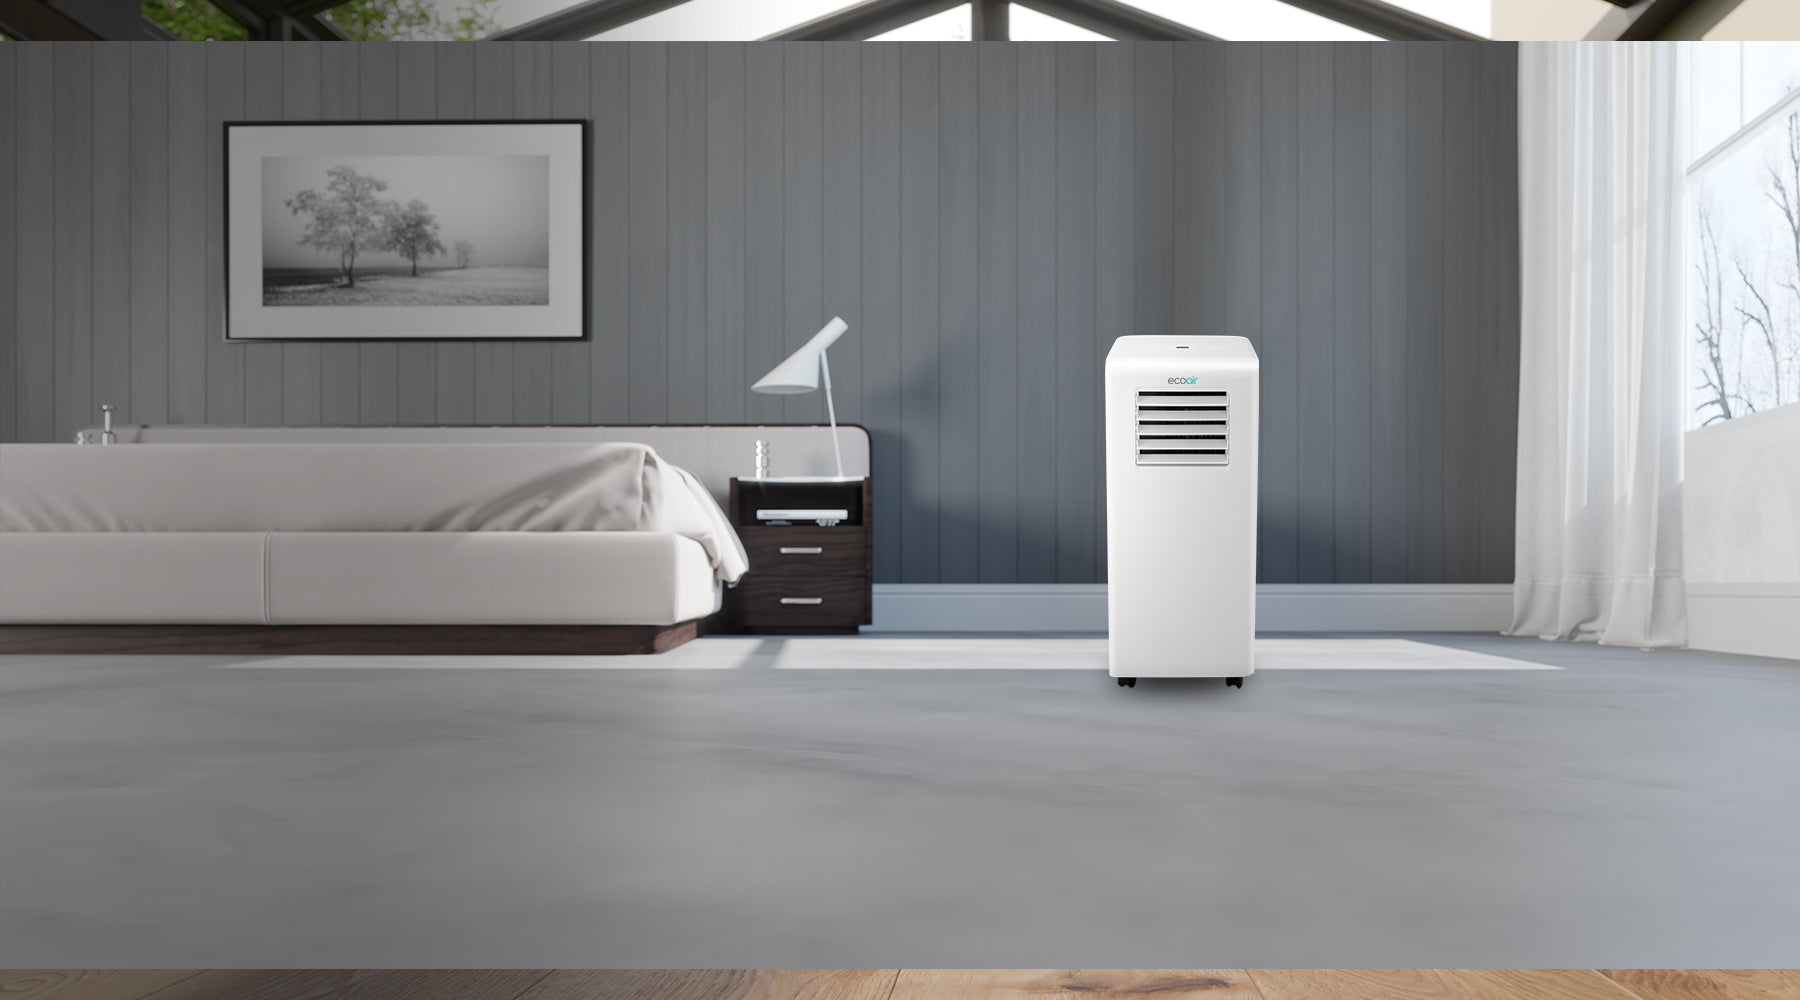 Portable_Air_Conditioner_with_Smart_App_Remote_Control_6-in-1_Modes_Energy_Efficiency_Rating_Class_A_7000_BTU_Crystal_MK2_Banner